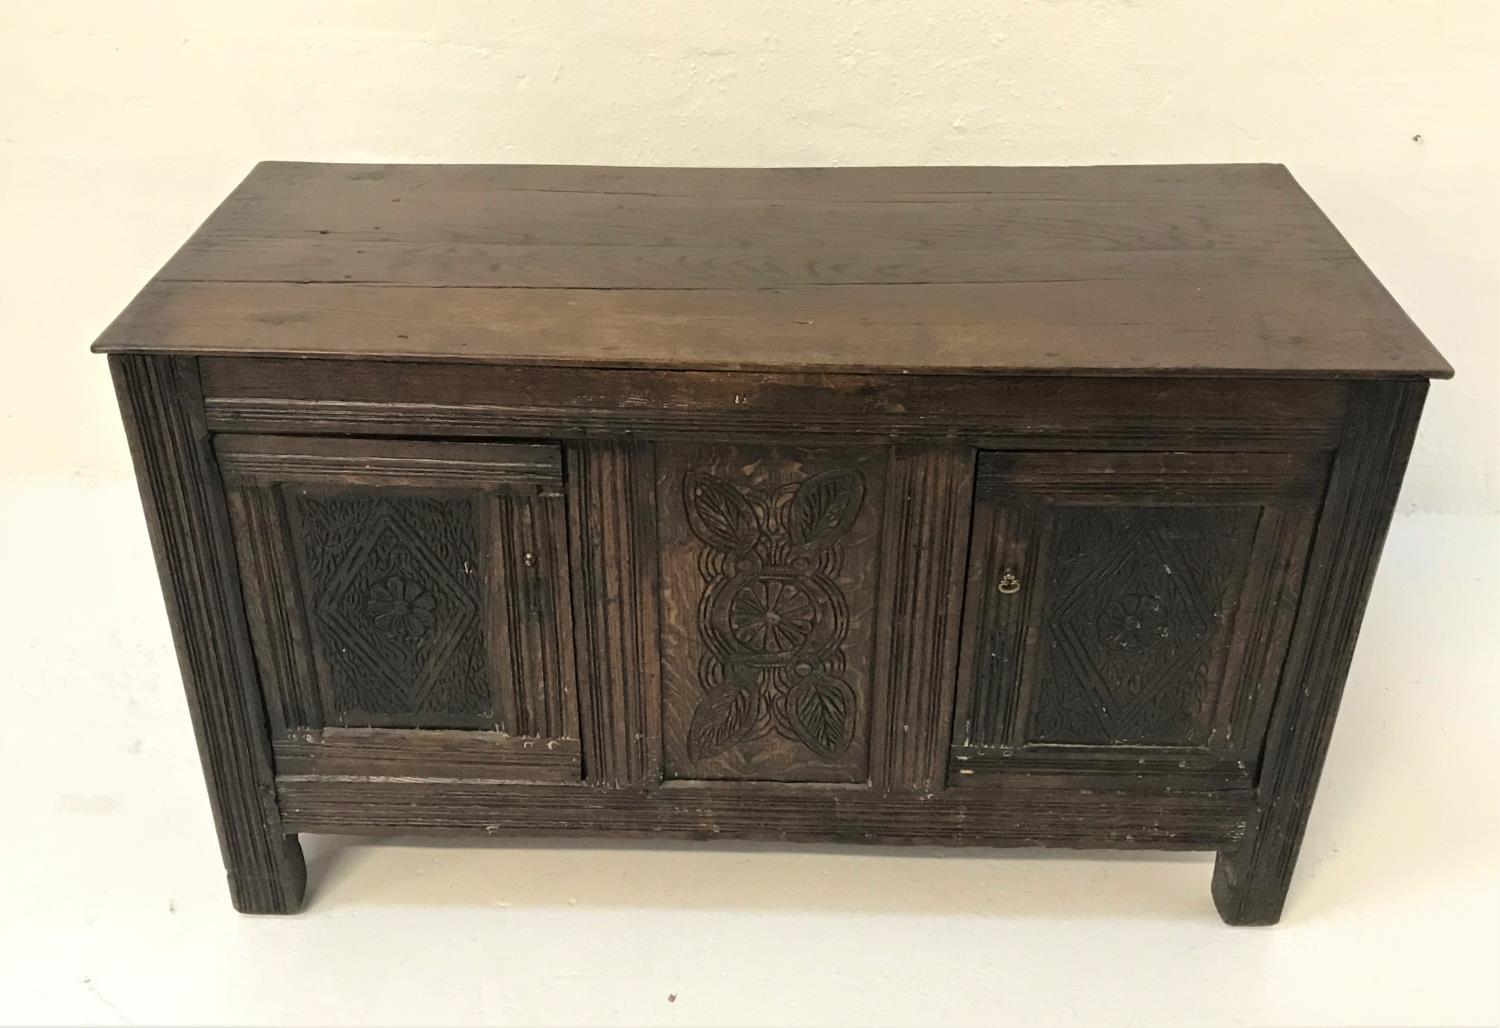 18TH CENTURY OAK COFFER with a plain top above a channel moulded frieze with a carved central